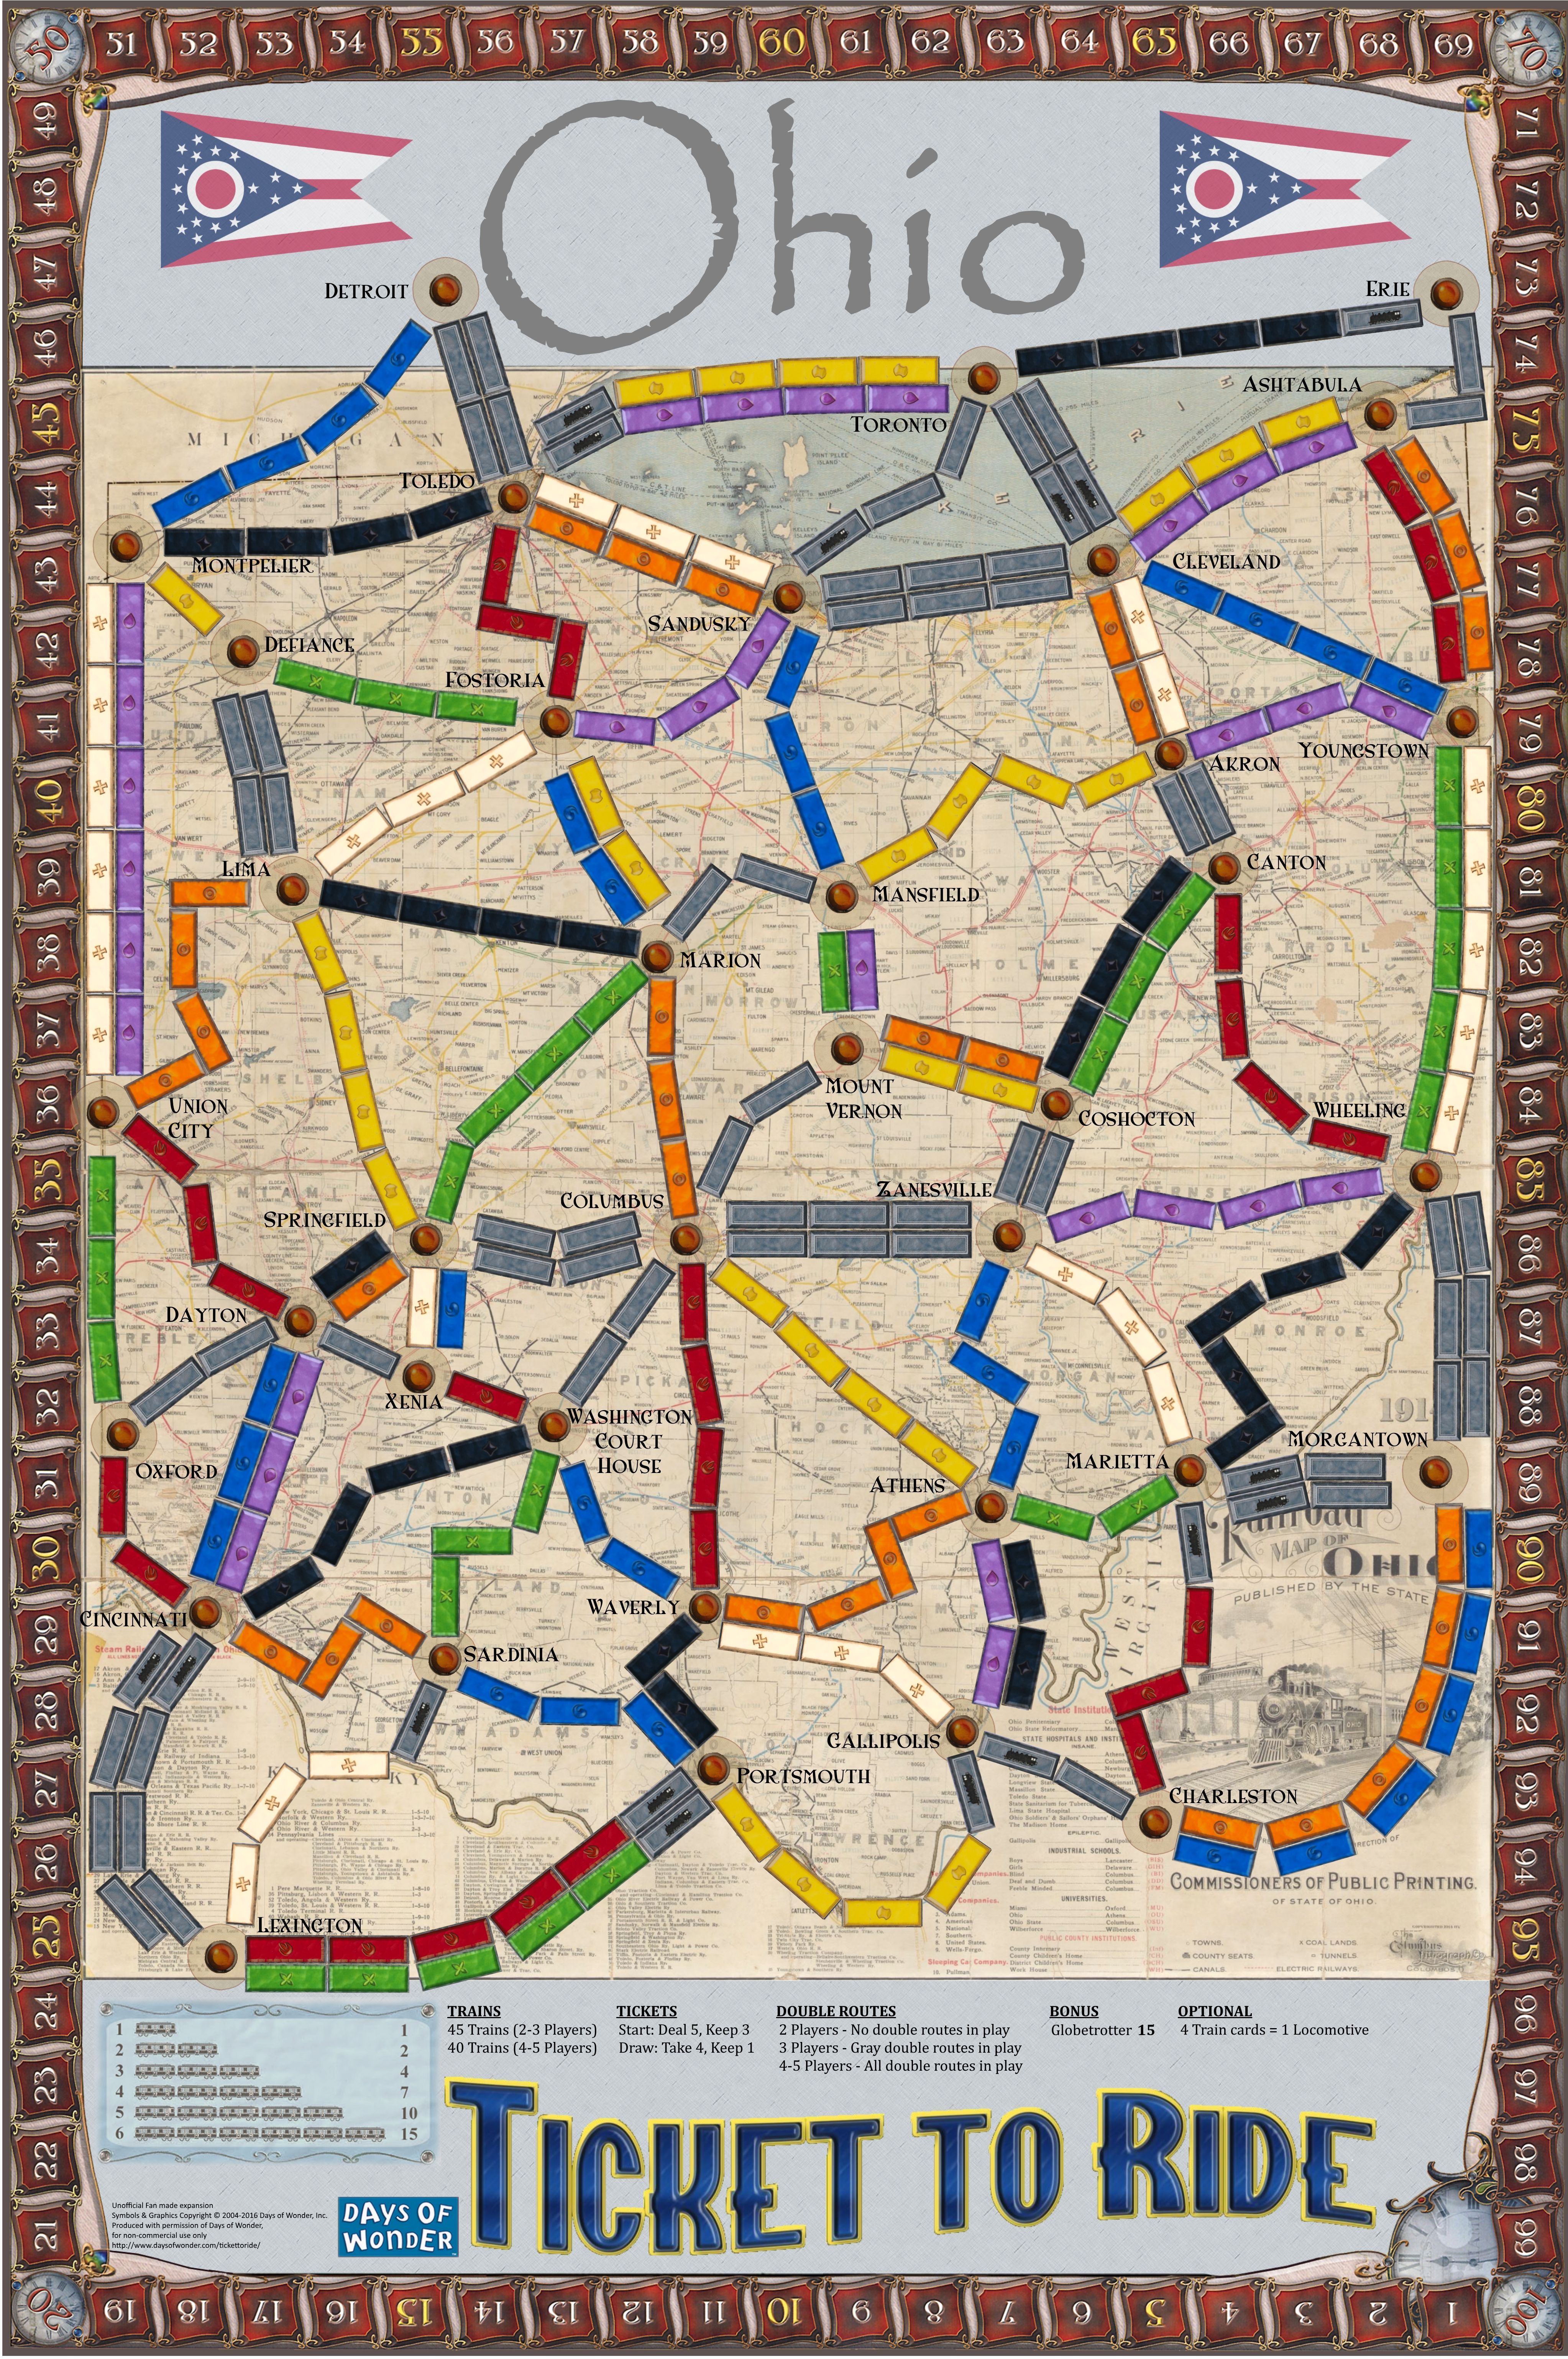 Ohio (fan expansion for Ticket to Ride)